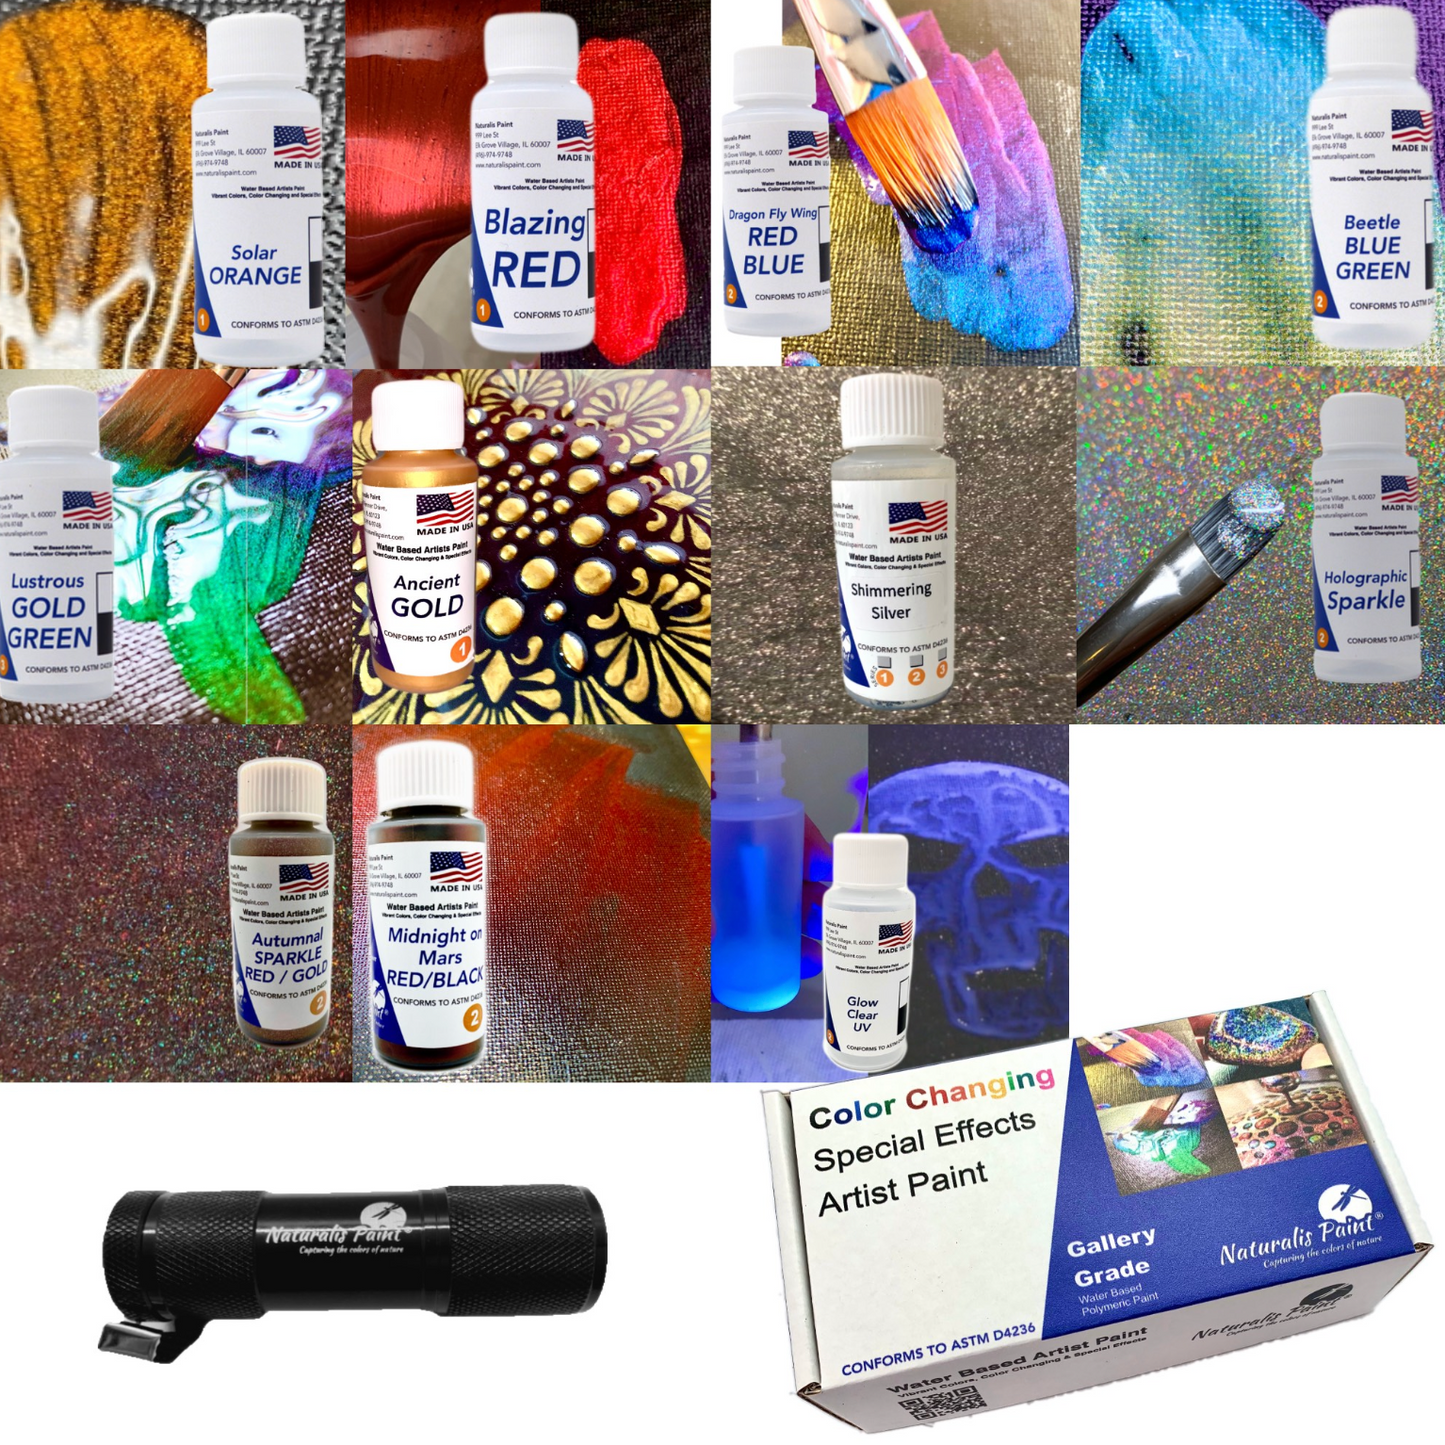 Naturalis Paint Color Changing Special Effects Artist Paint Pack (11 Colors)